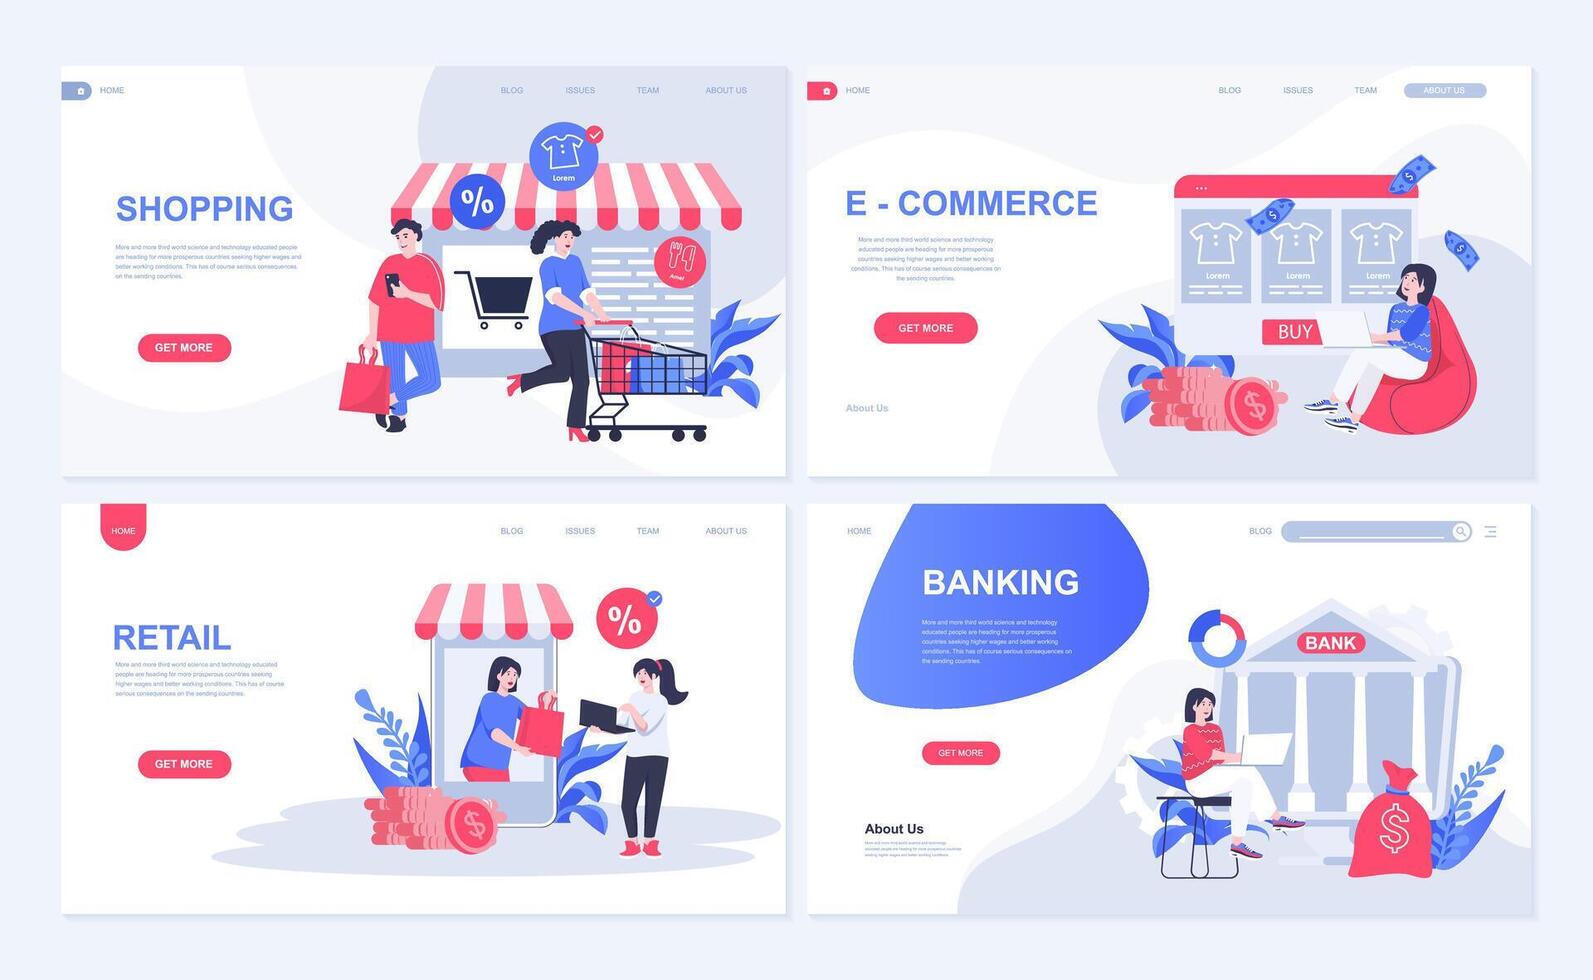 Shopping and e-commerce web concept for landing page in flat design. Customers make purchases at retail stores and online shops, paying orders. Vector illustration with people characters for homepage